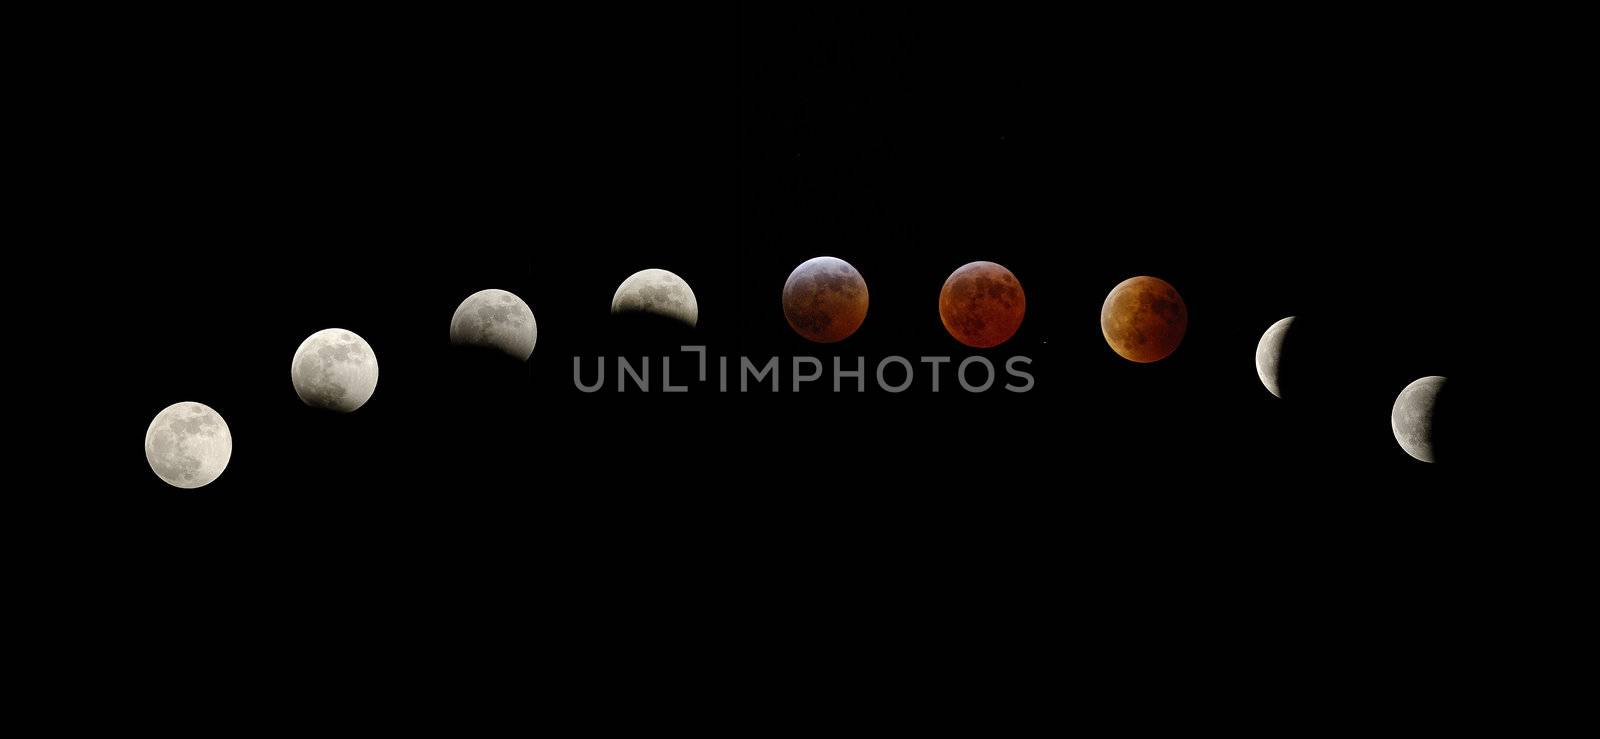 Phases of total lunar eclipse. The Moon is completely shadowed by the Earth, and no direct light can reach it from the Sun. However, the Earth's atmosphere refracts, that is bends, light so that it illuminates the Moon with a red colour
